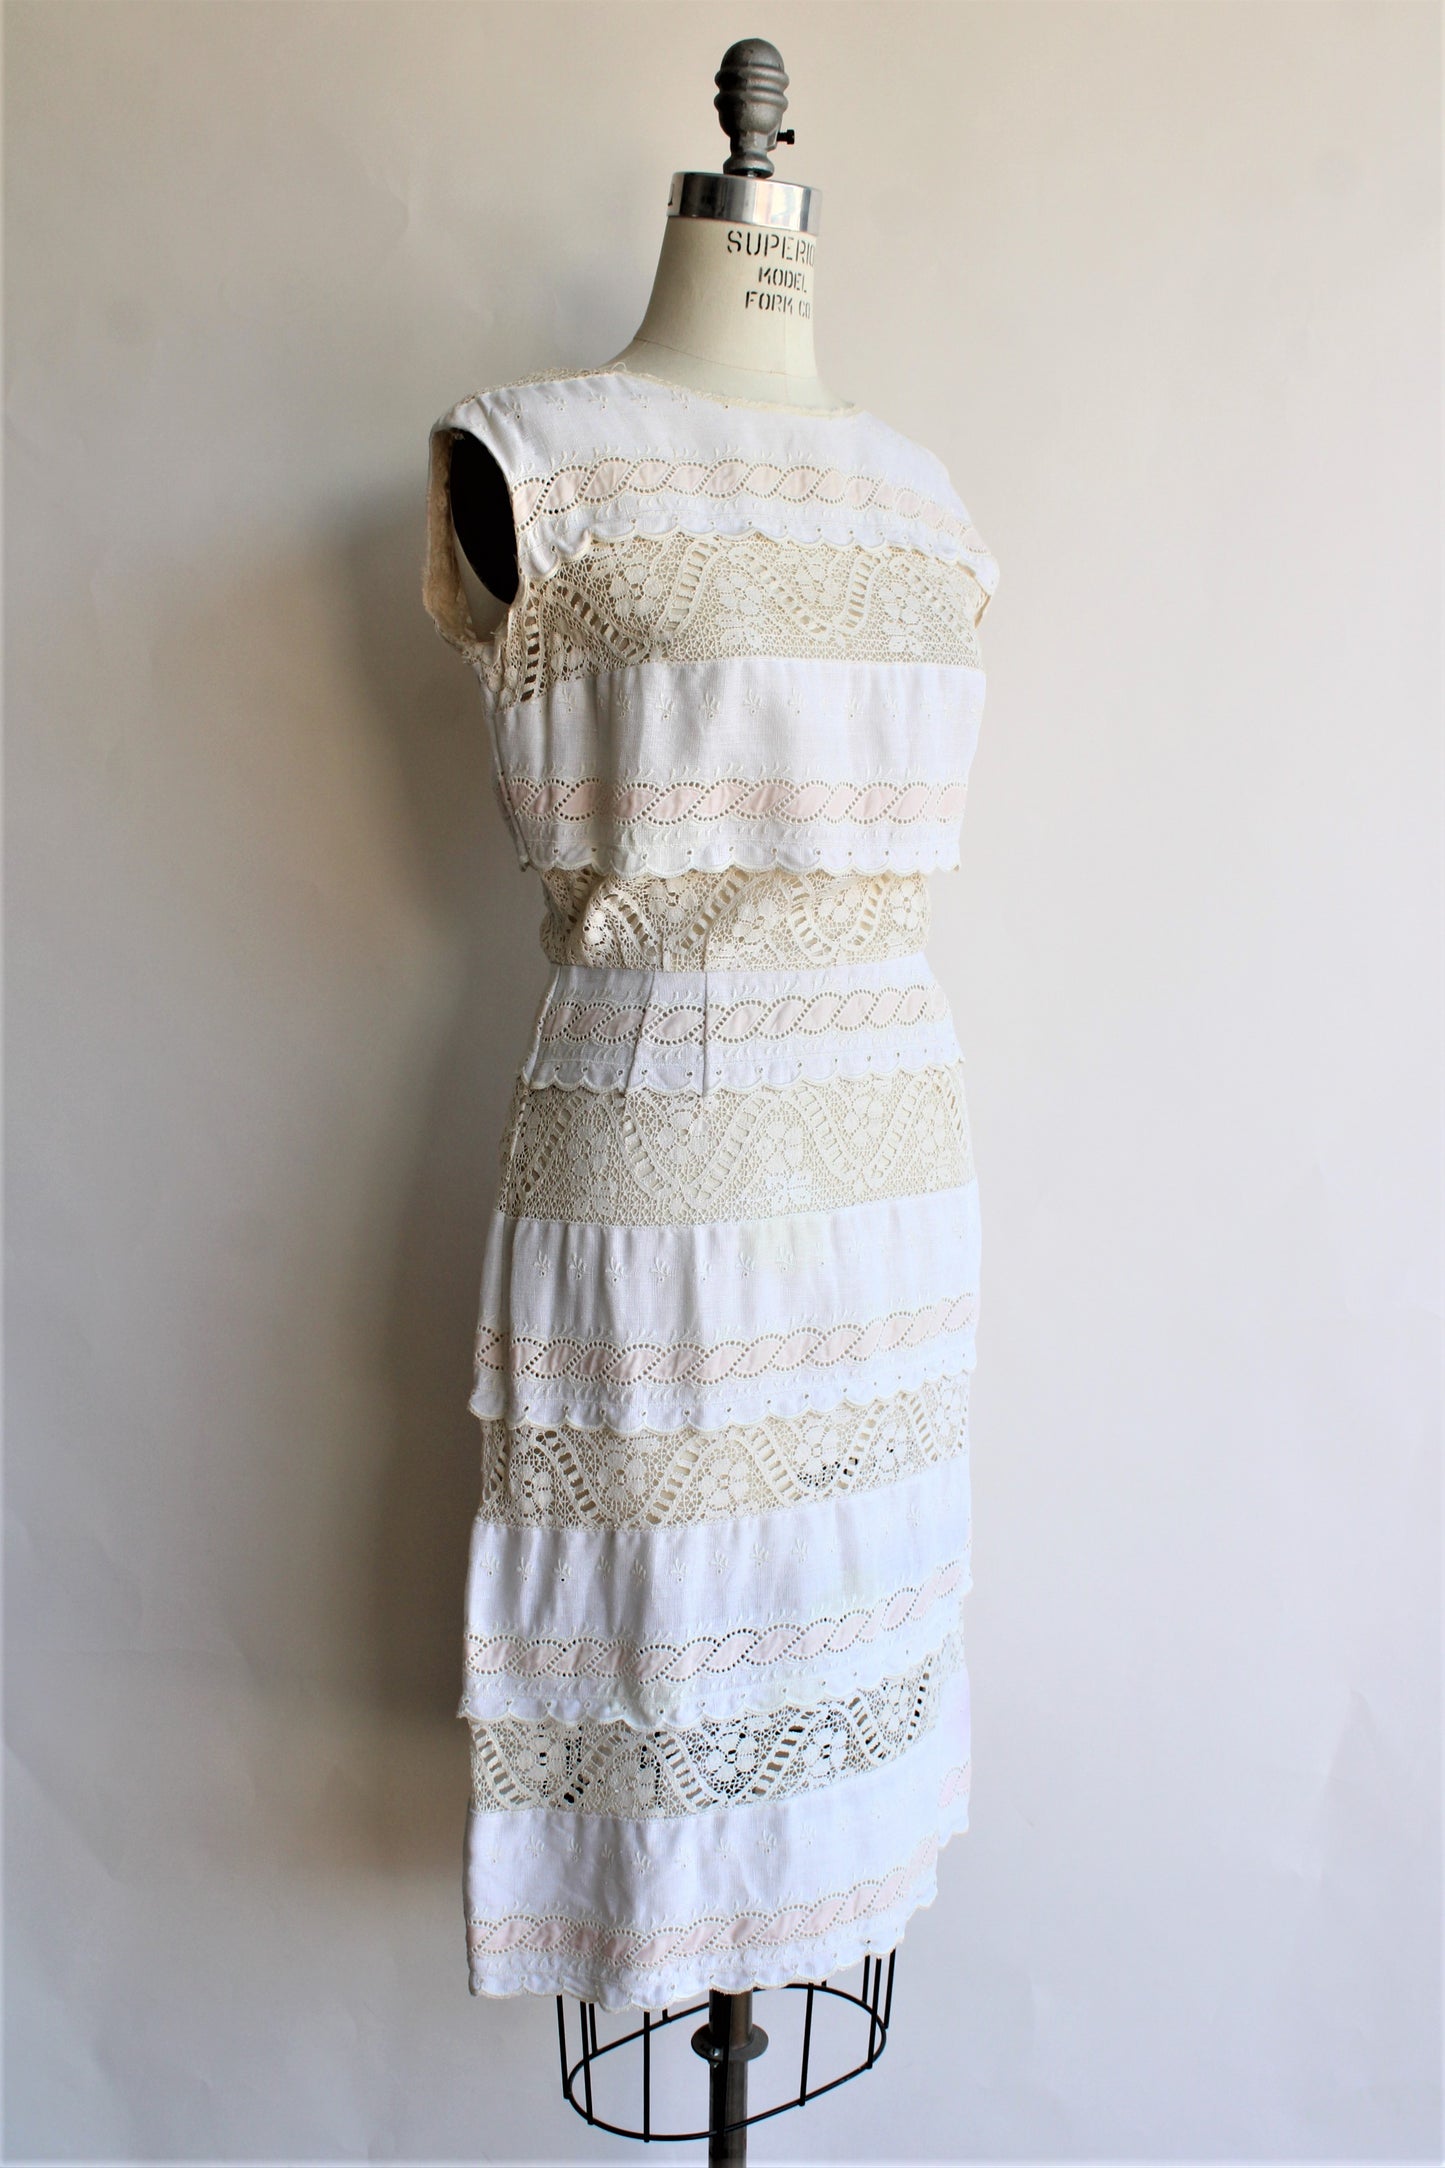 Vintage 1960s Linen and Lace Dress from Saks Fifth Avenue